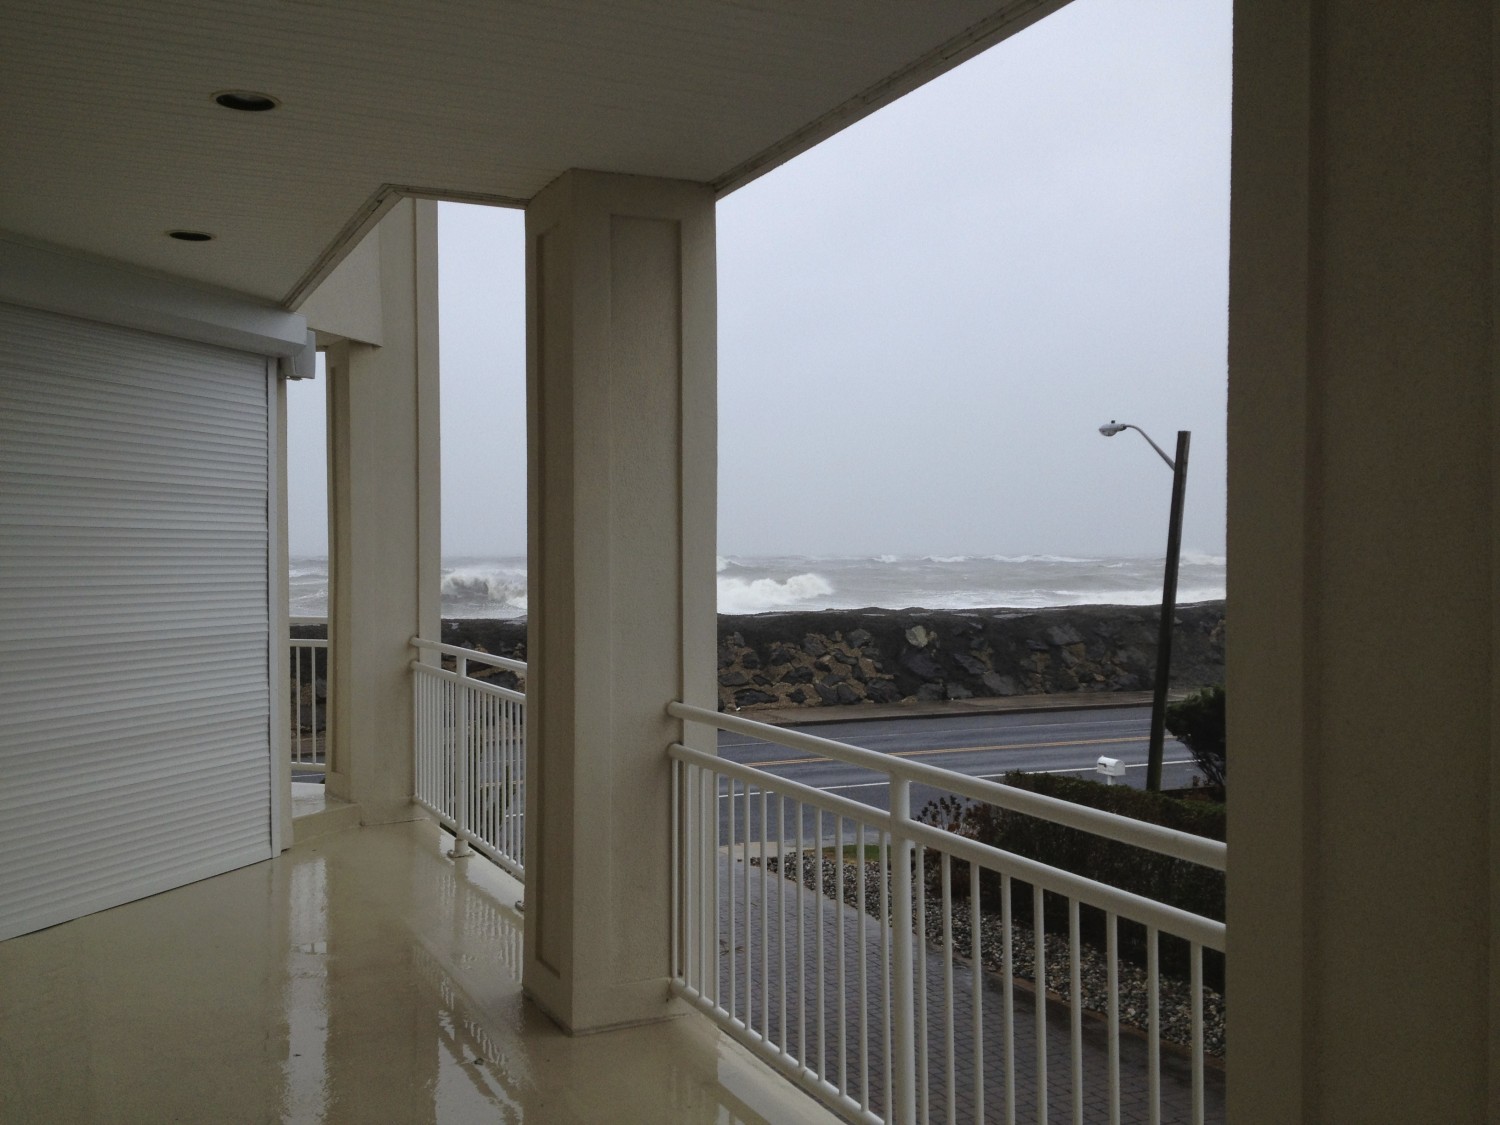 hurricane sandy view from deck shutters waves